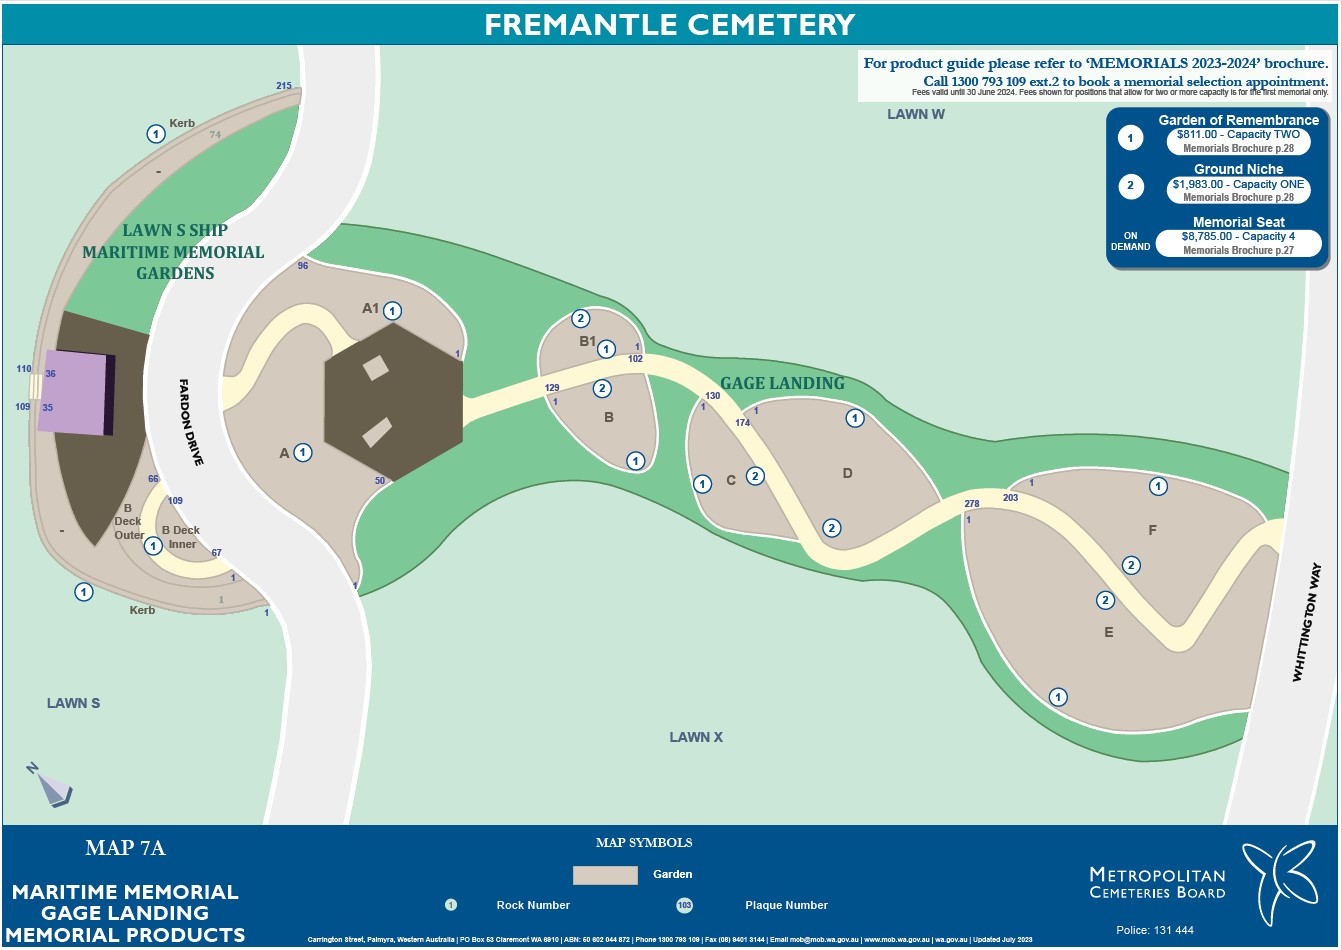 Map 7A Maritime Memorial Gage Landing Memorial Products Fremantle Cemetery